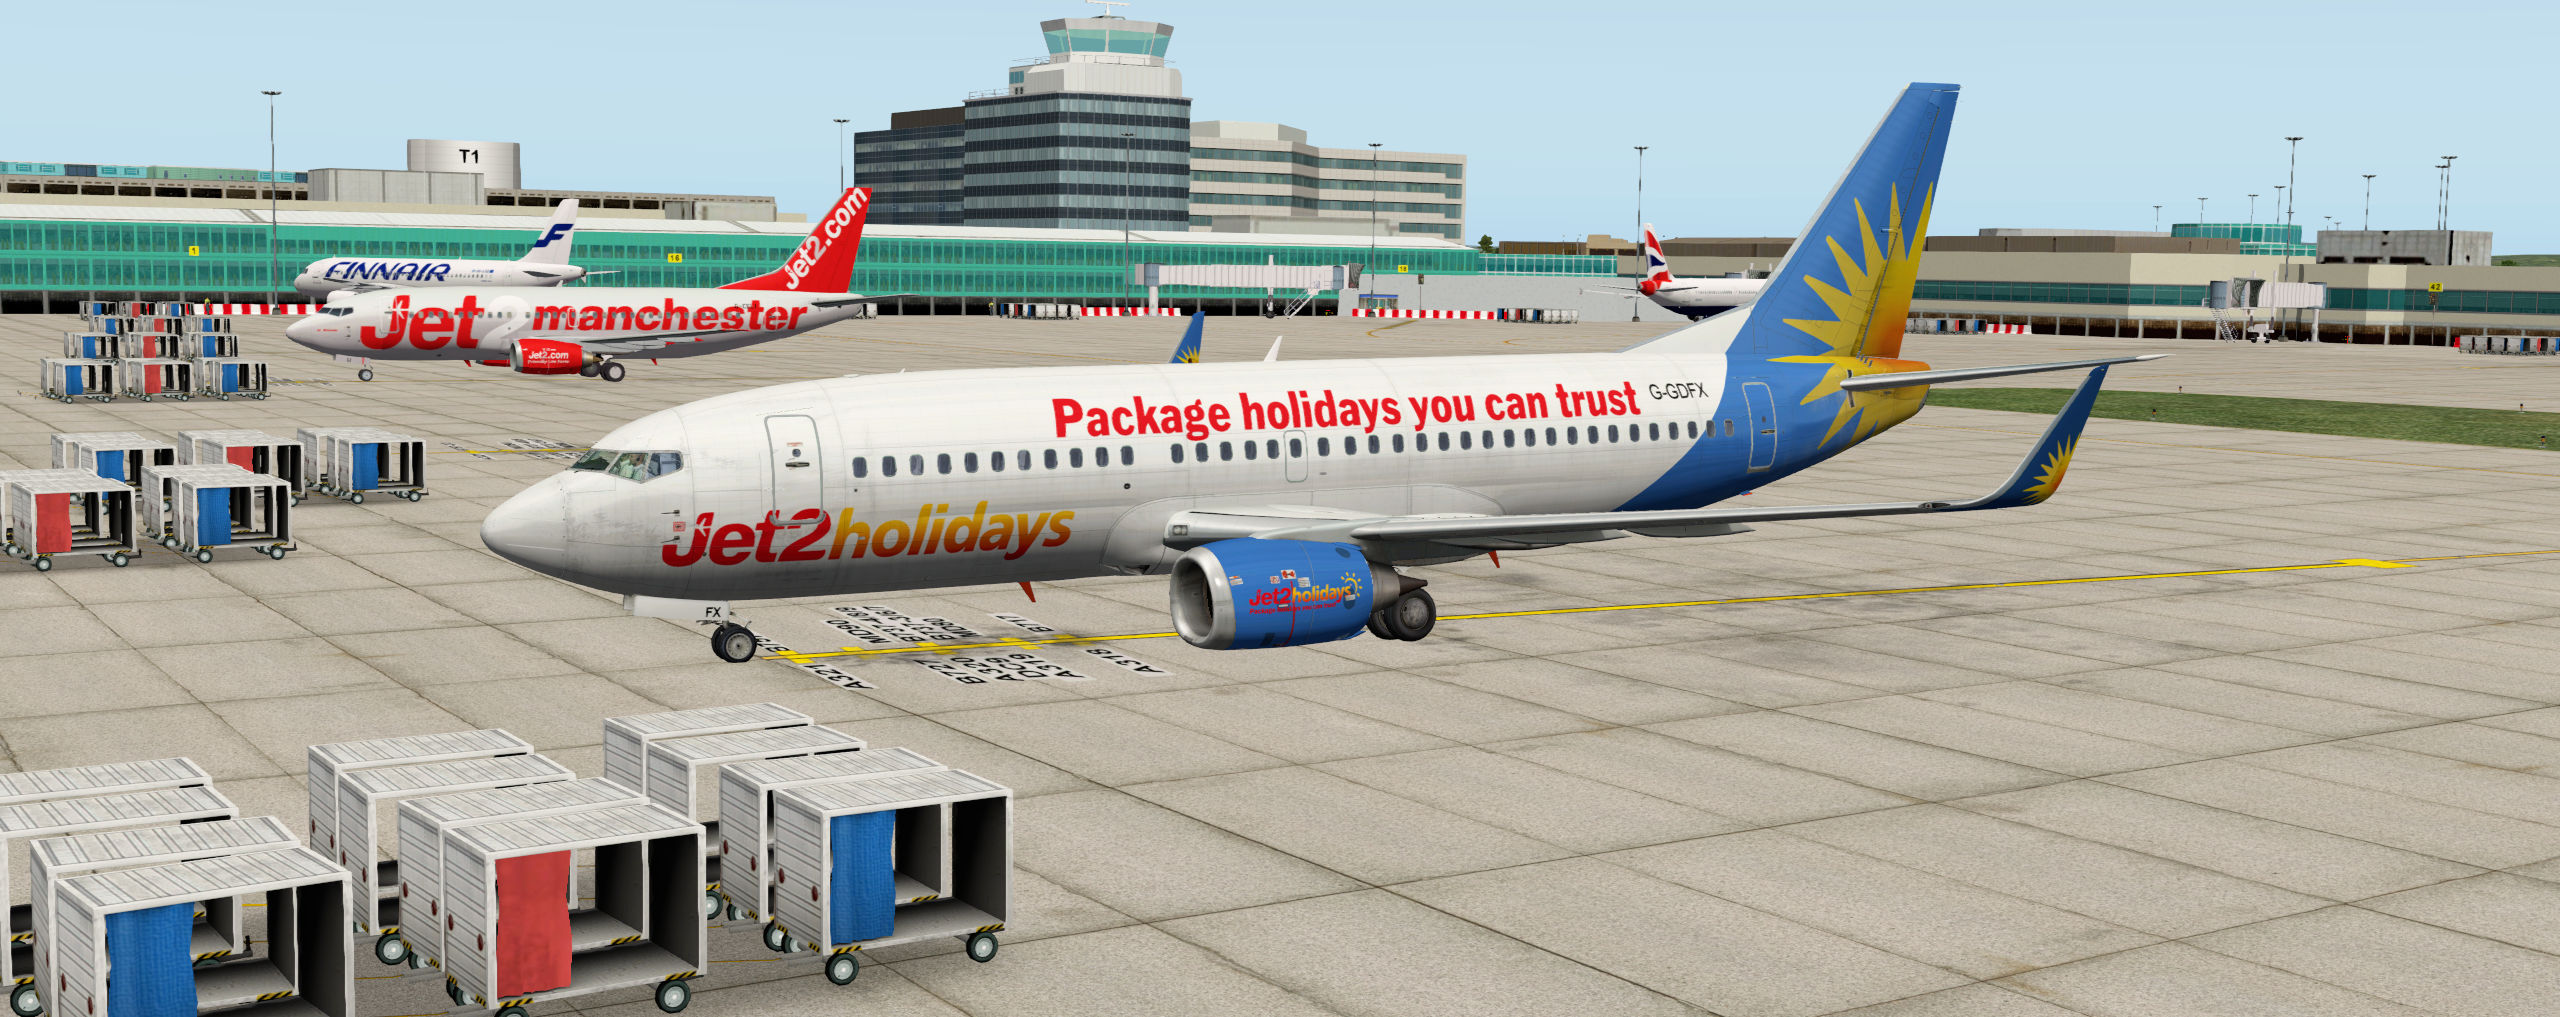 More information about "IXEG 737-300 Jet2 Holidays"